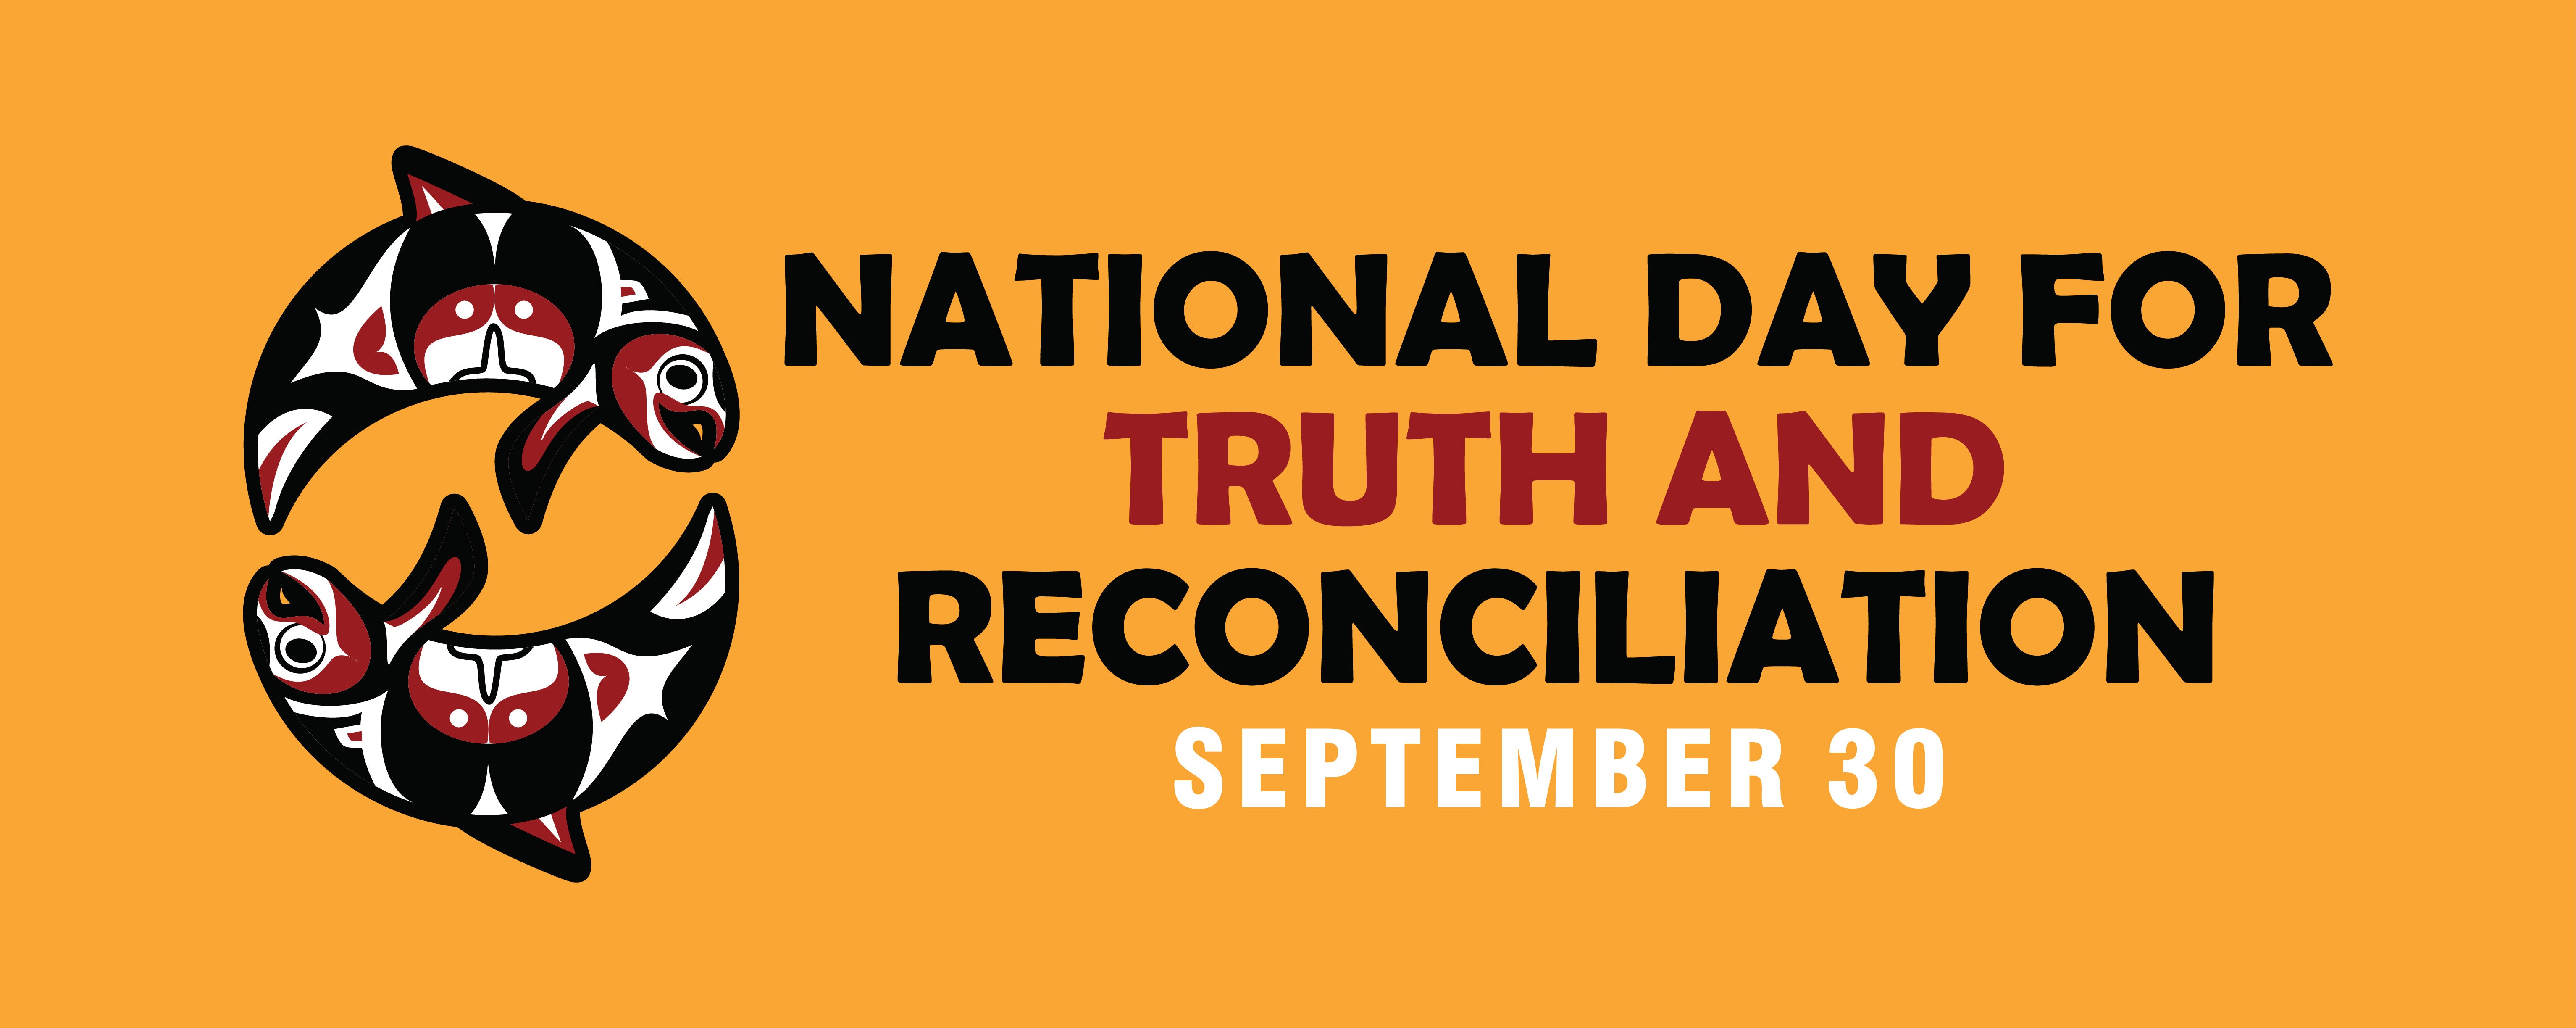 September 30 National Day for Truth and Reconciliation